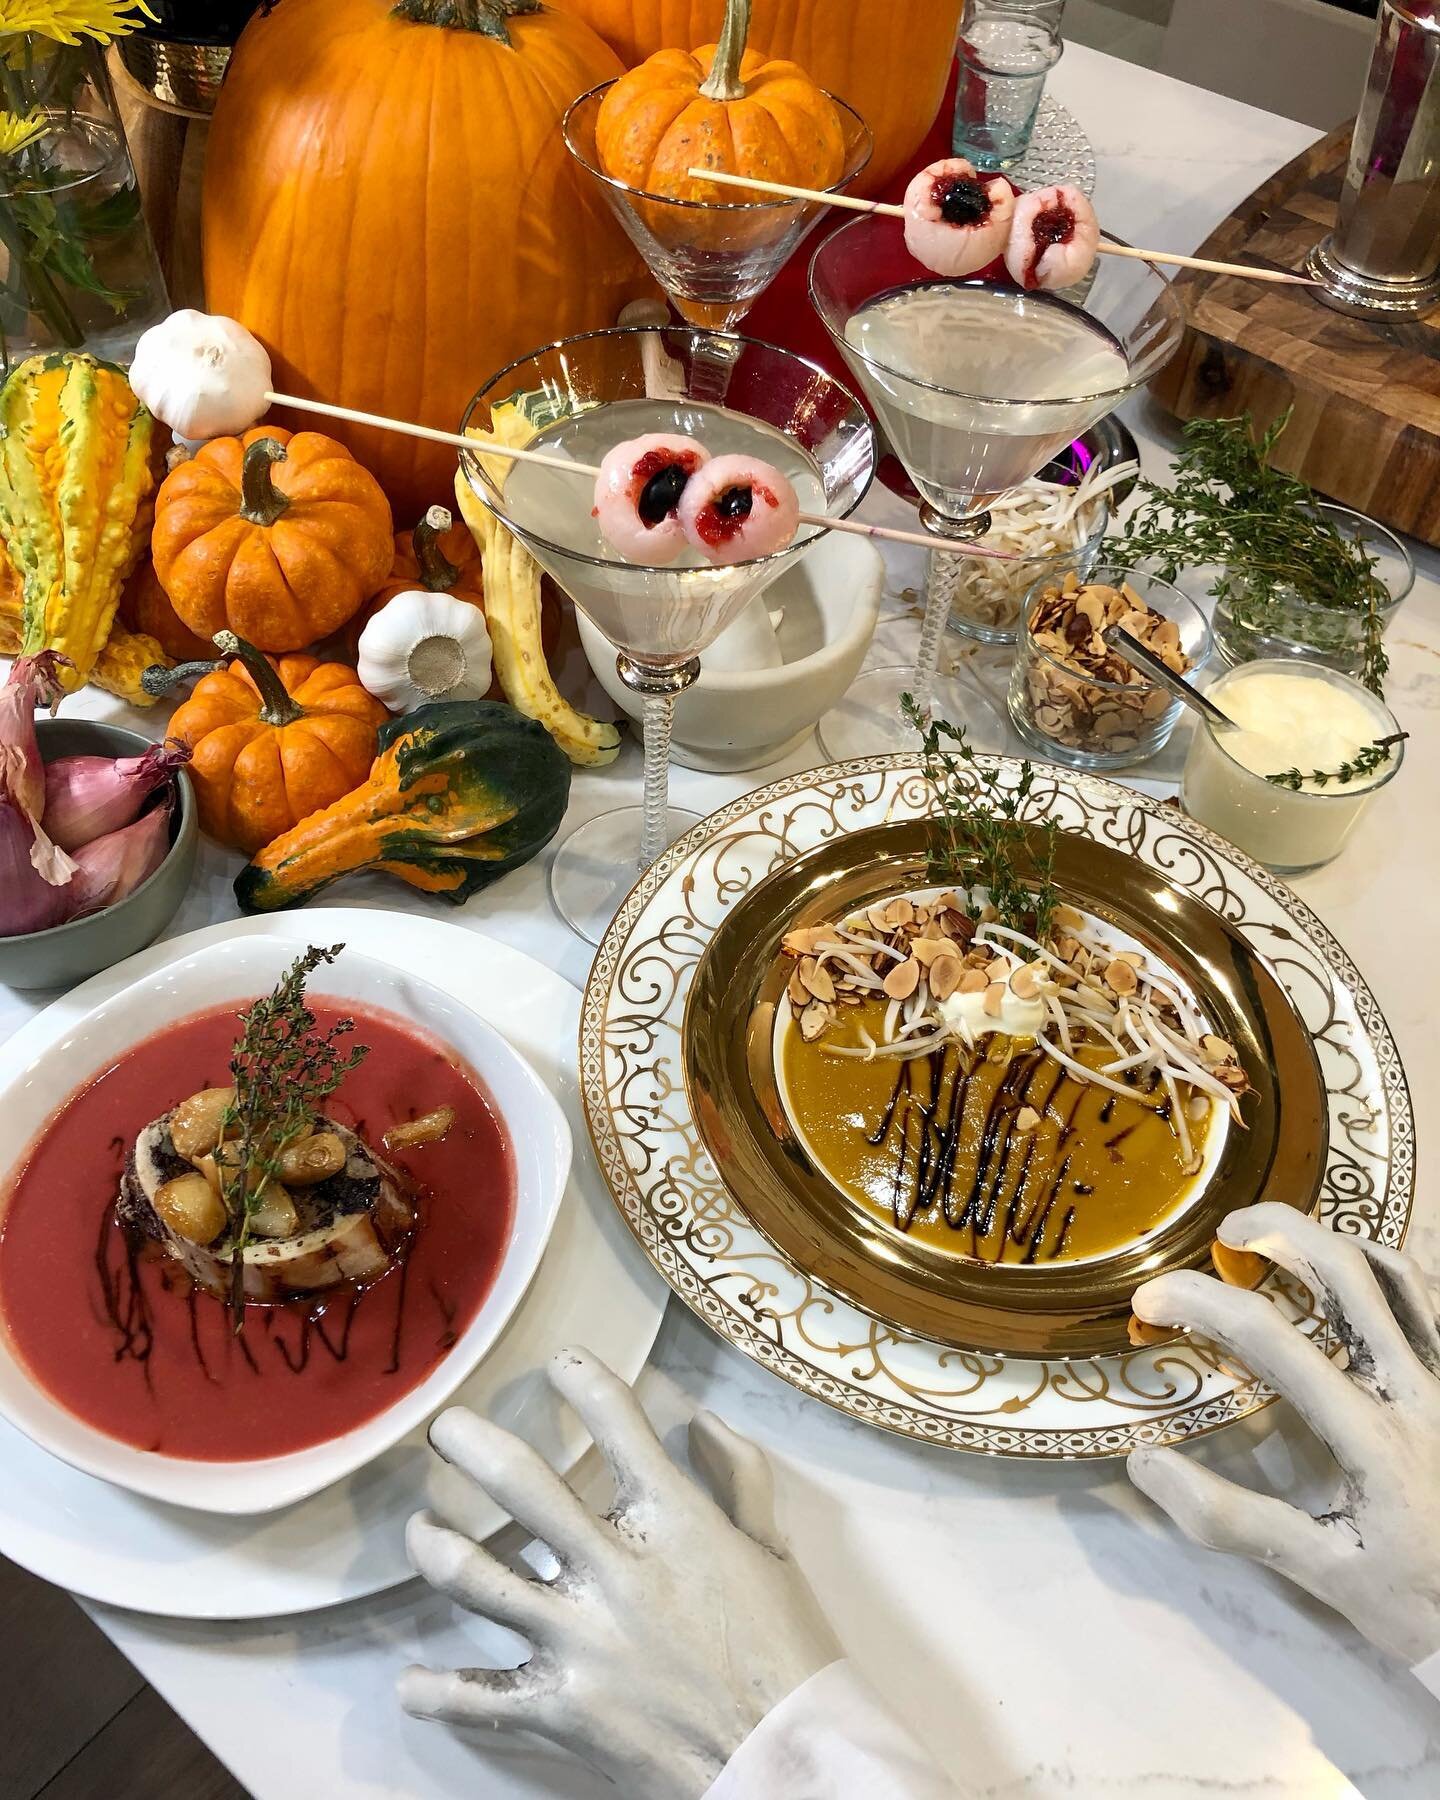 Flashback to last Halloween when I hit the @vikingrange showroom with @jaimelaurita and We whipped up a creepy dinner menu complete with lychee eyeball martinis.  The @vikingrange Series 7 just kills.  See what I did there? 🤣💀 @middleby_chicago 

#